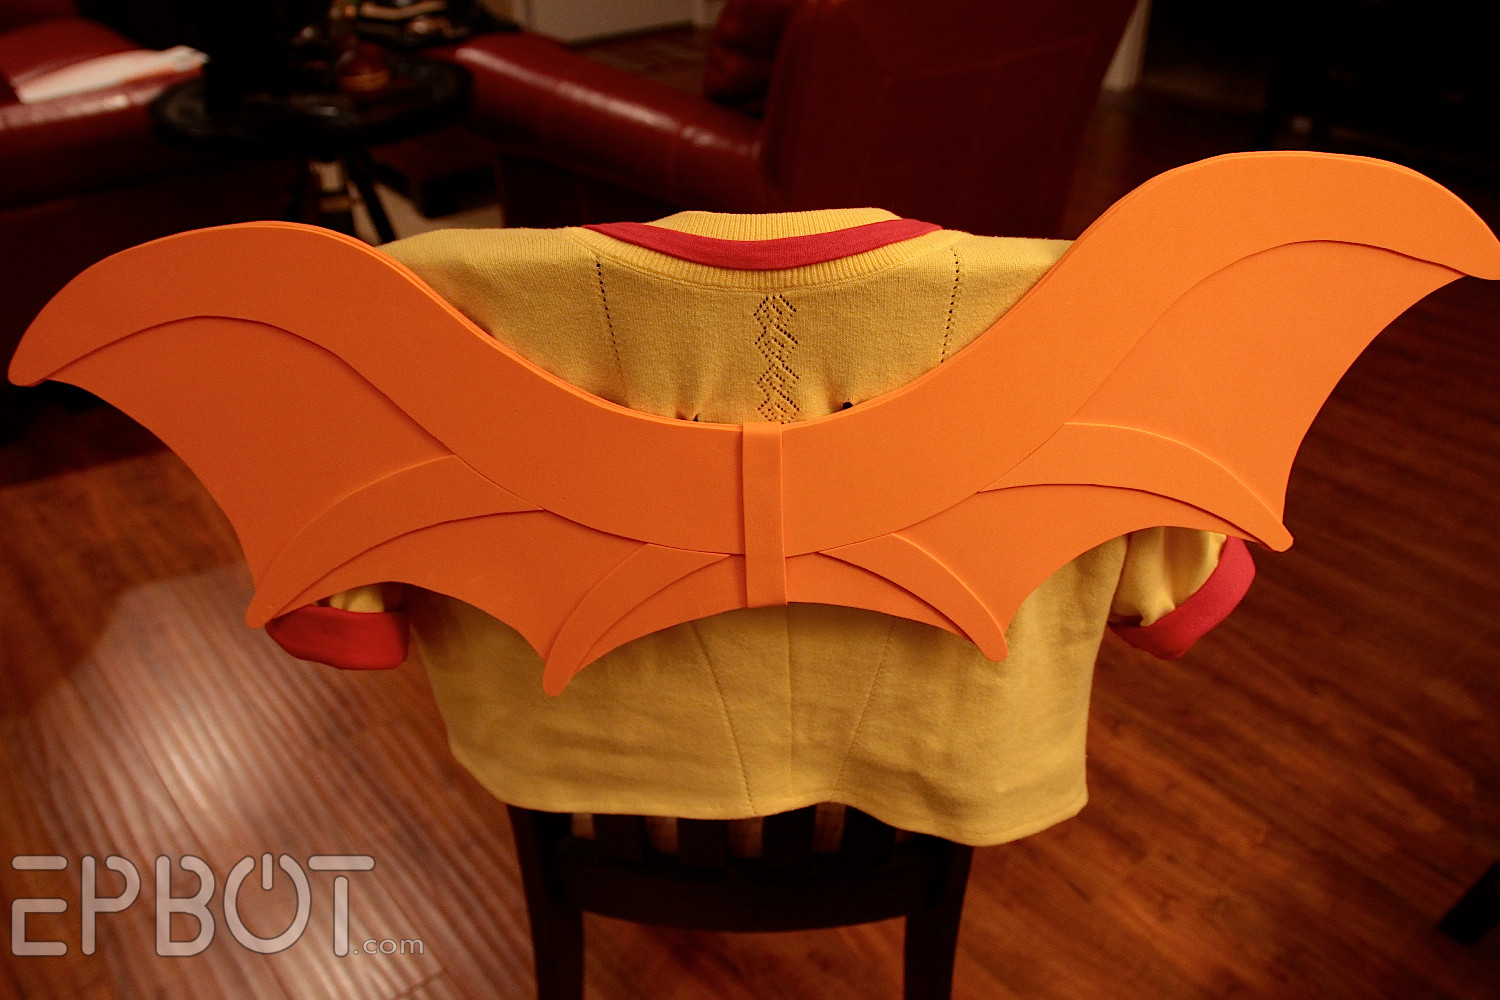 Best ideas about DIY Dragon Wings
. Save or Pin EPBOT DIY Dragon Horns & Wings Part 2 Now.